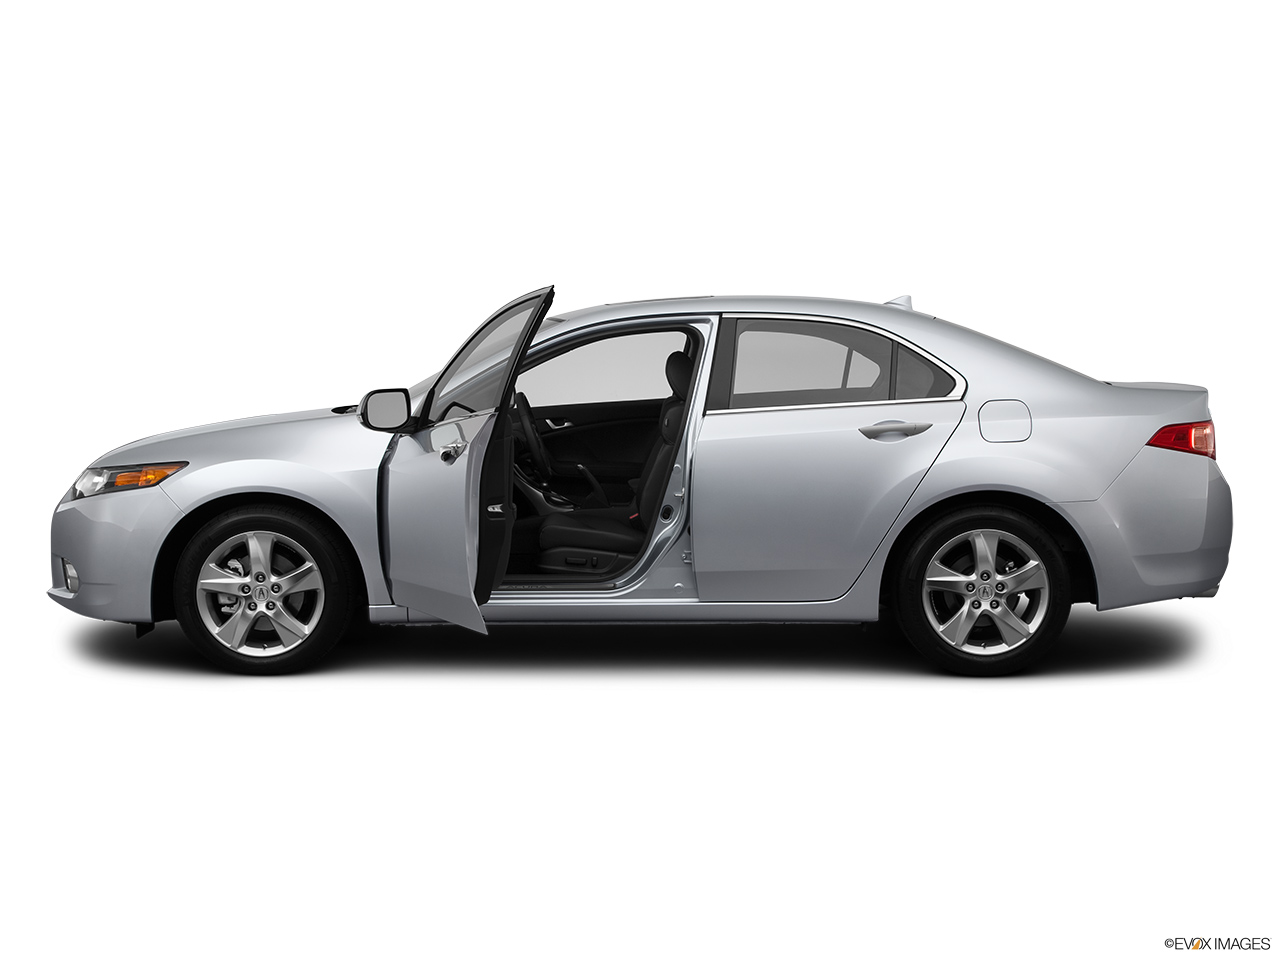 2012 Acura TSX 5-Speed Automatic Driver's side profile with drivers side door open. 